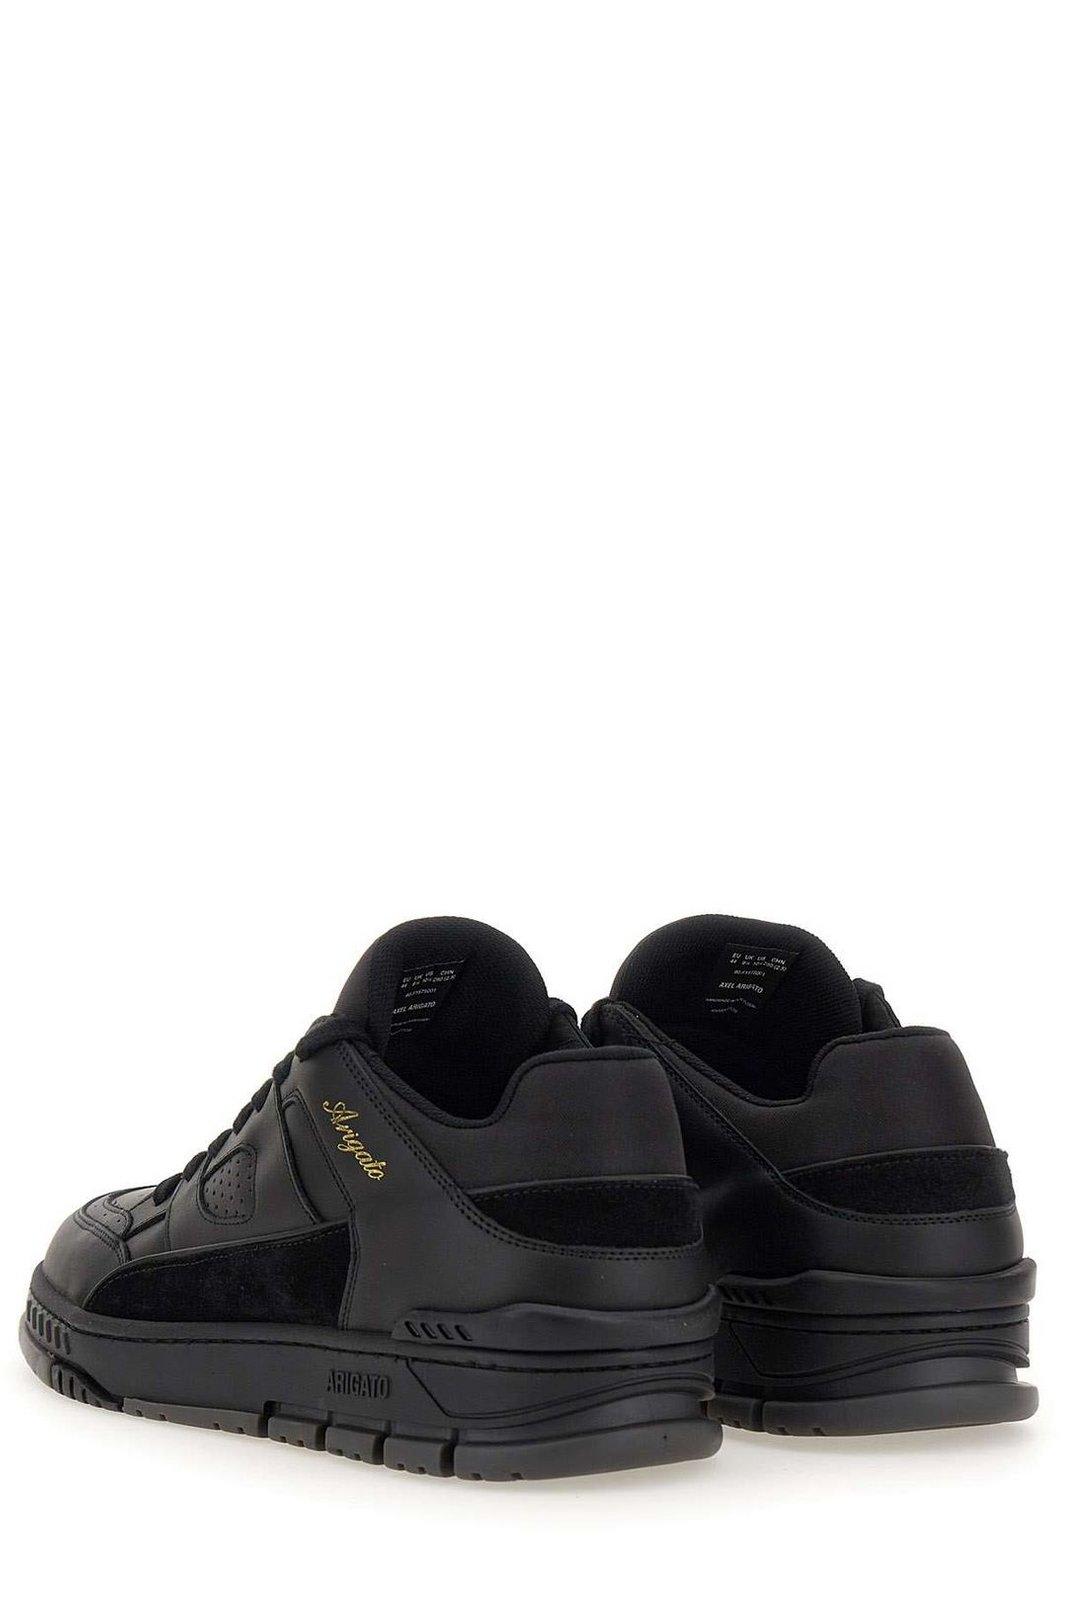 Shop Axel Arigato Round Toe Mid-top Sneakers